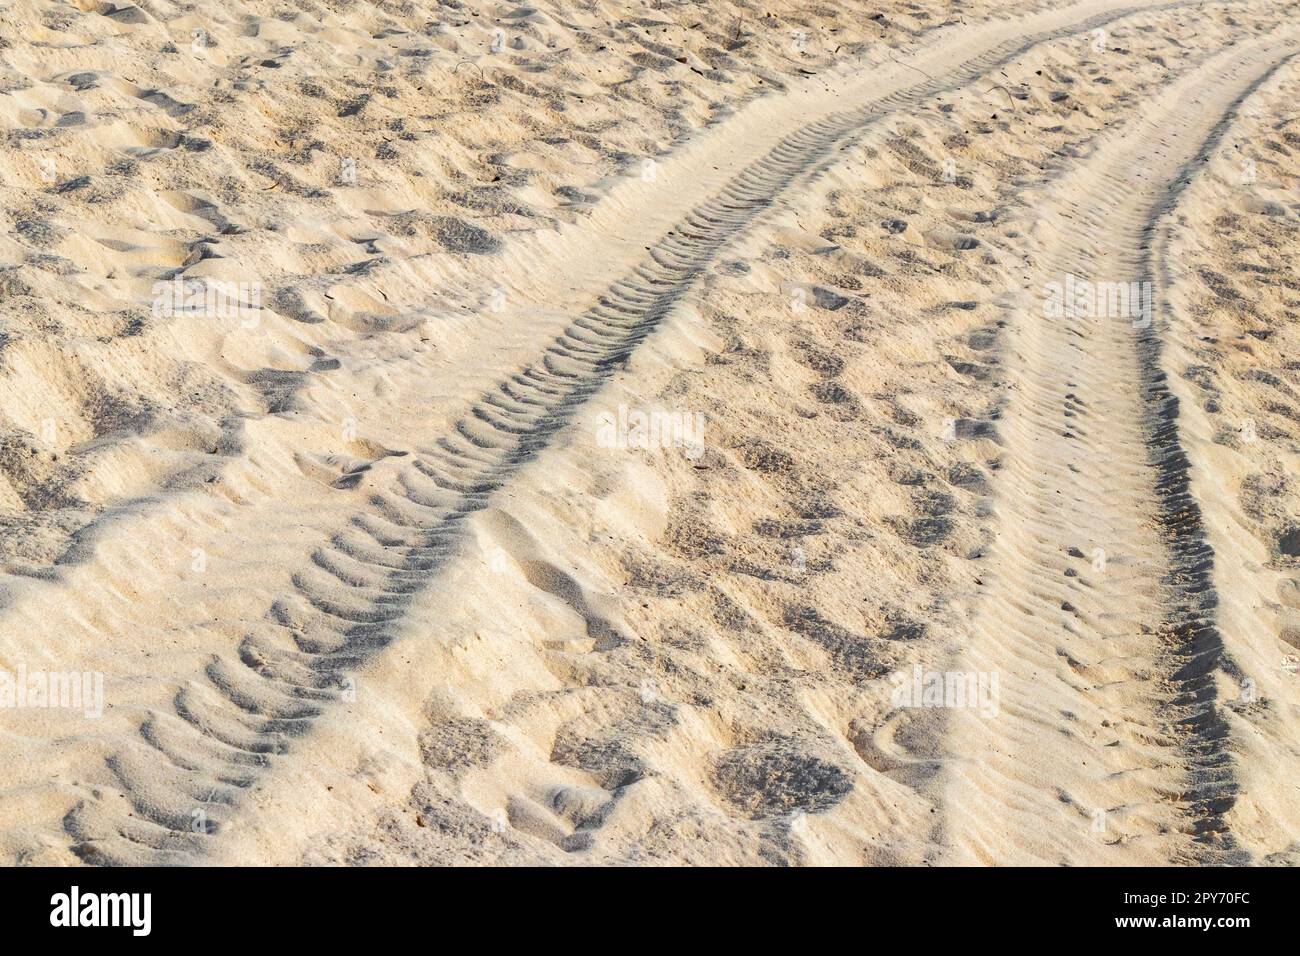 Ruts of an excavator in the beach sand in Mexico. Stock Photo